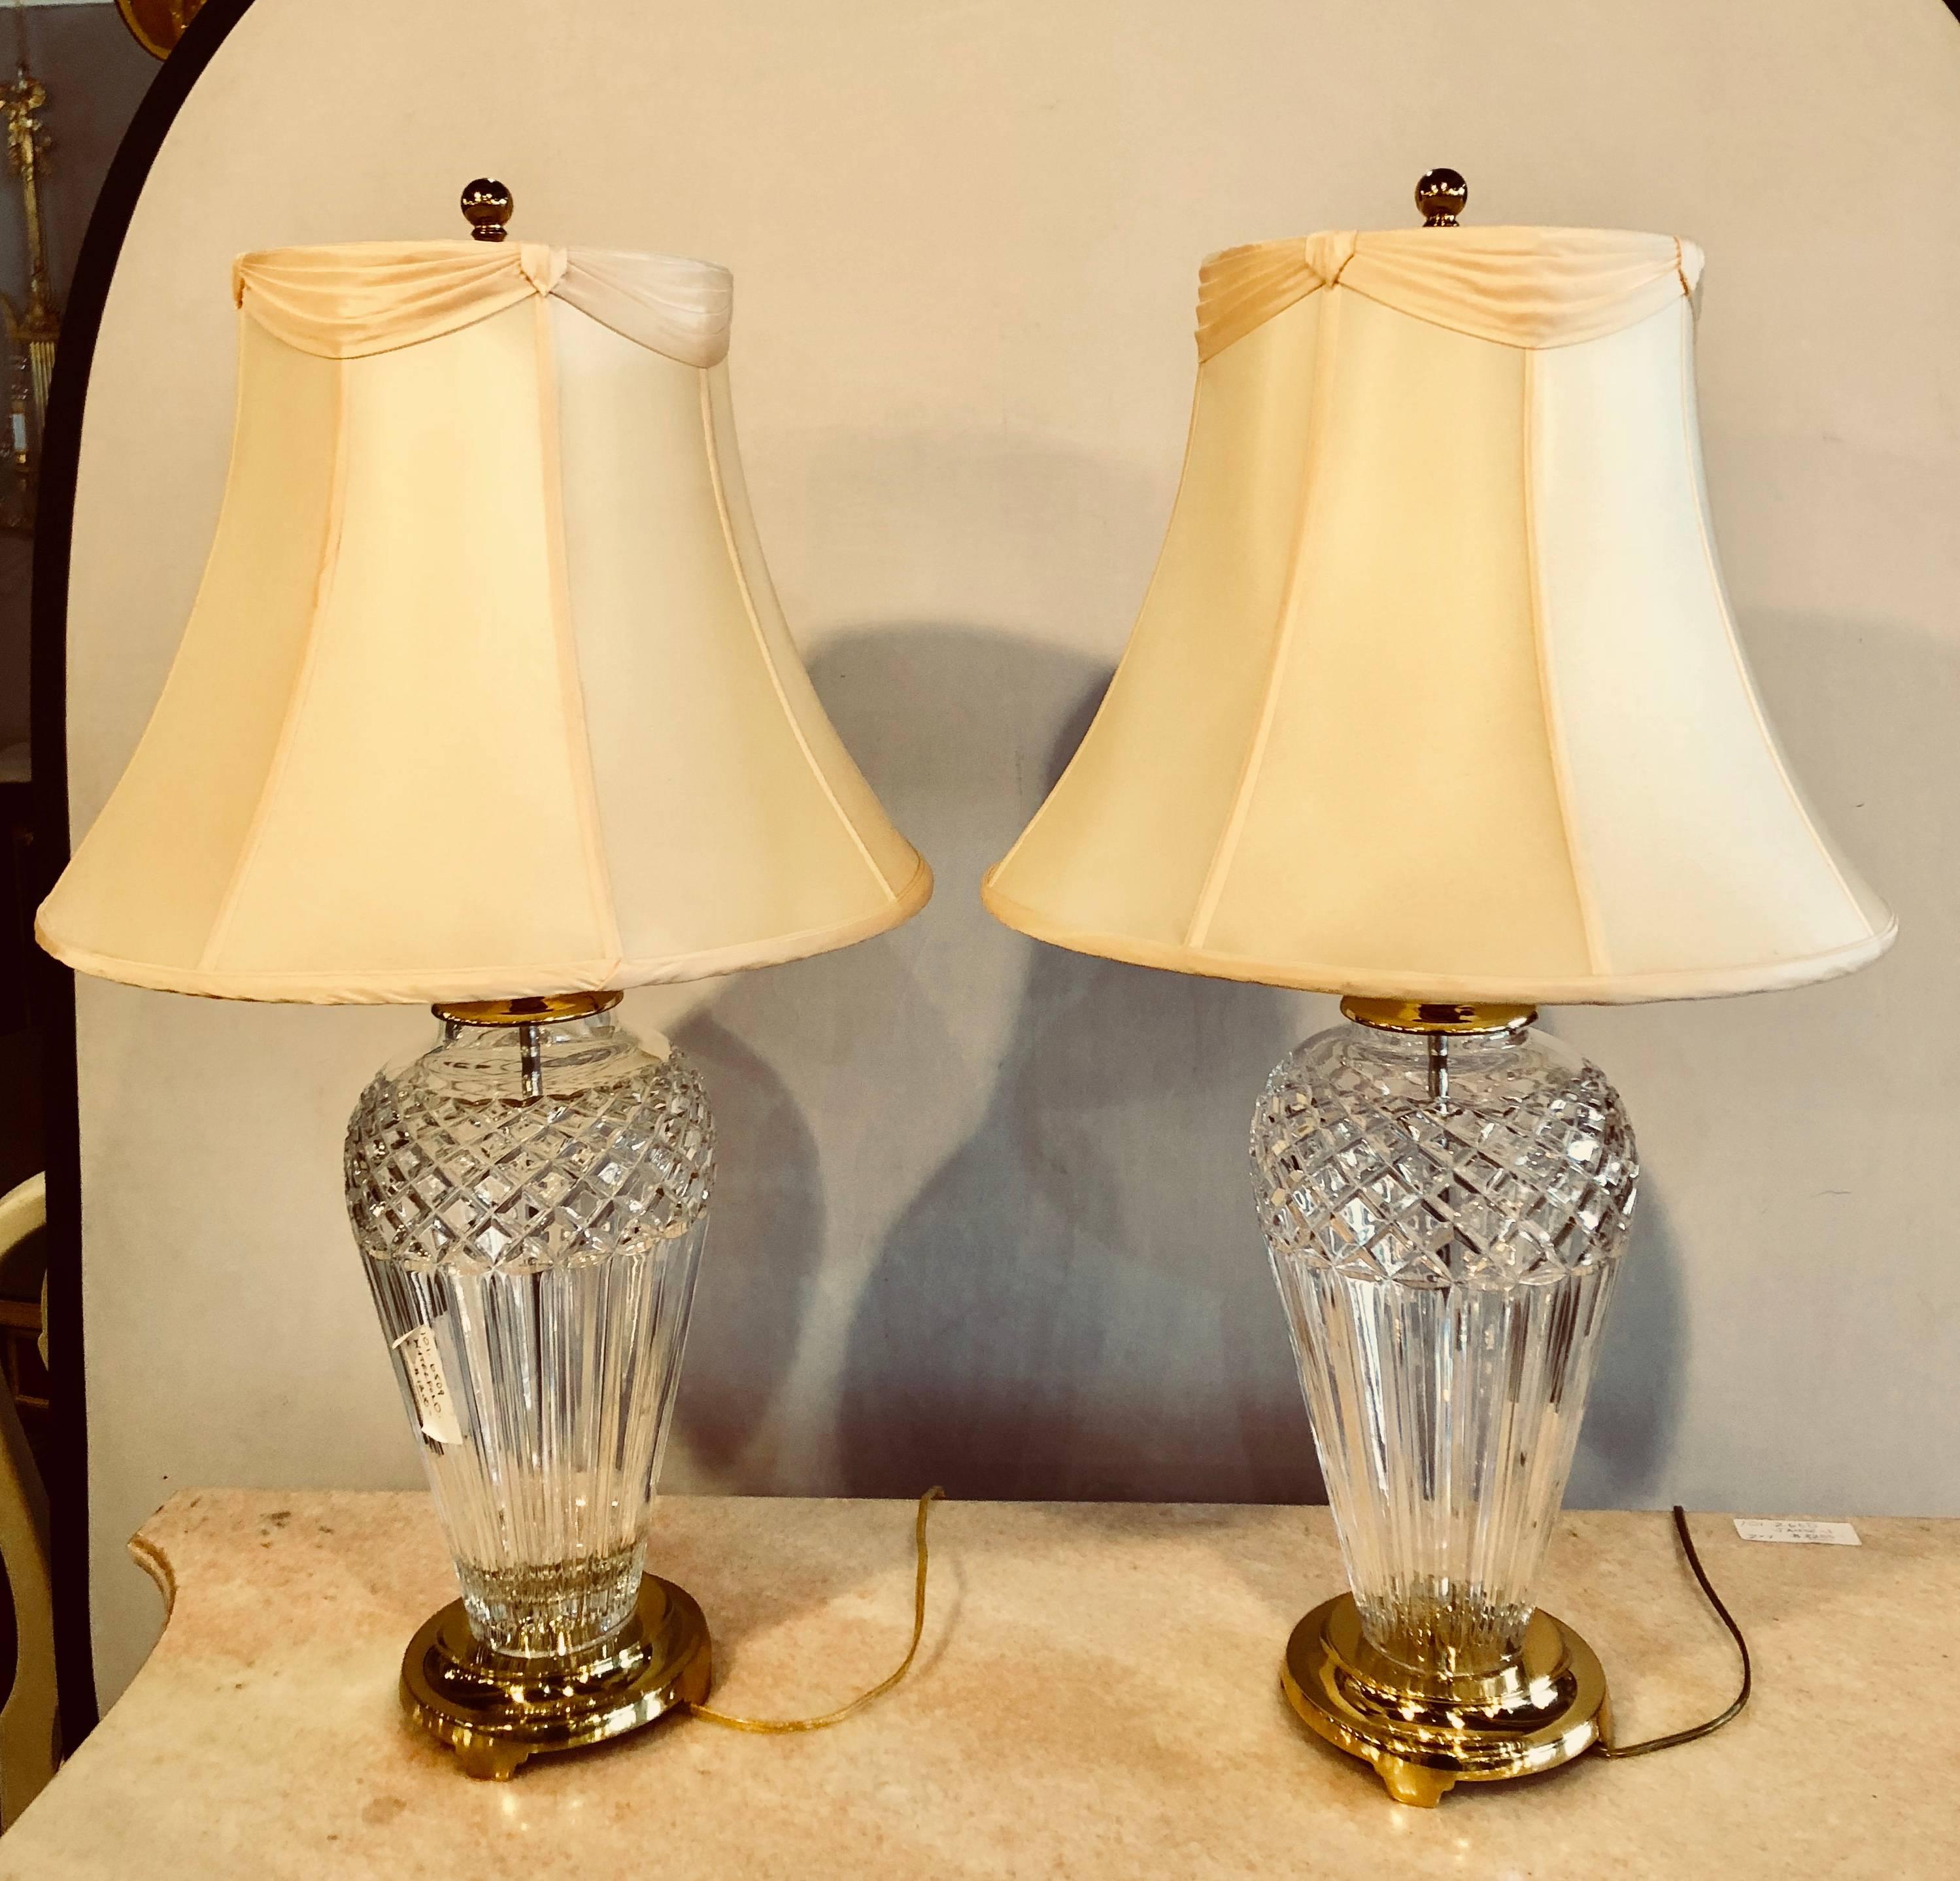 A pair of Waterford Crystal signed table lamps with stunning custom shades. Each standing on brass bases with brass caps and brass lampshade finials. Signed.